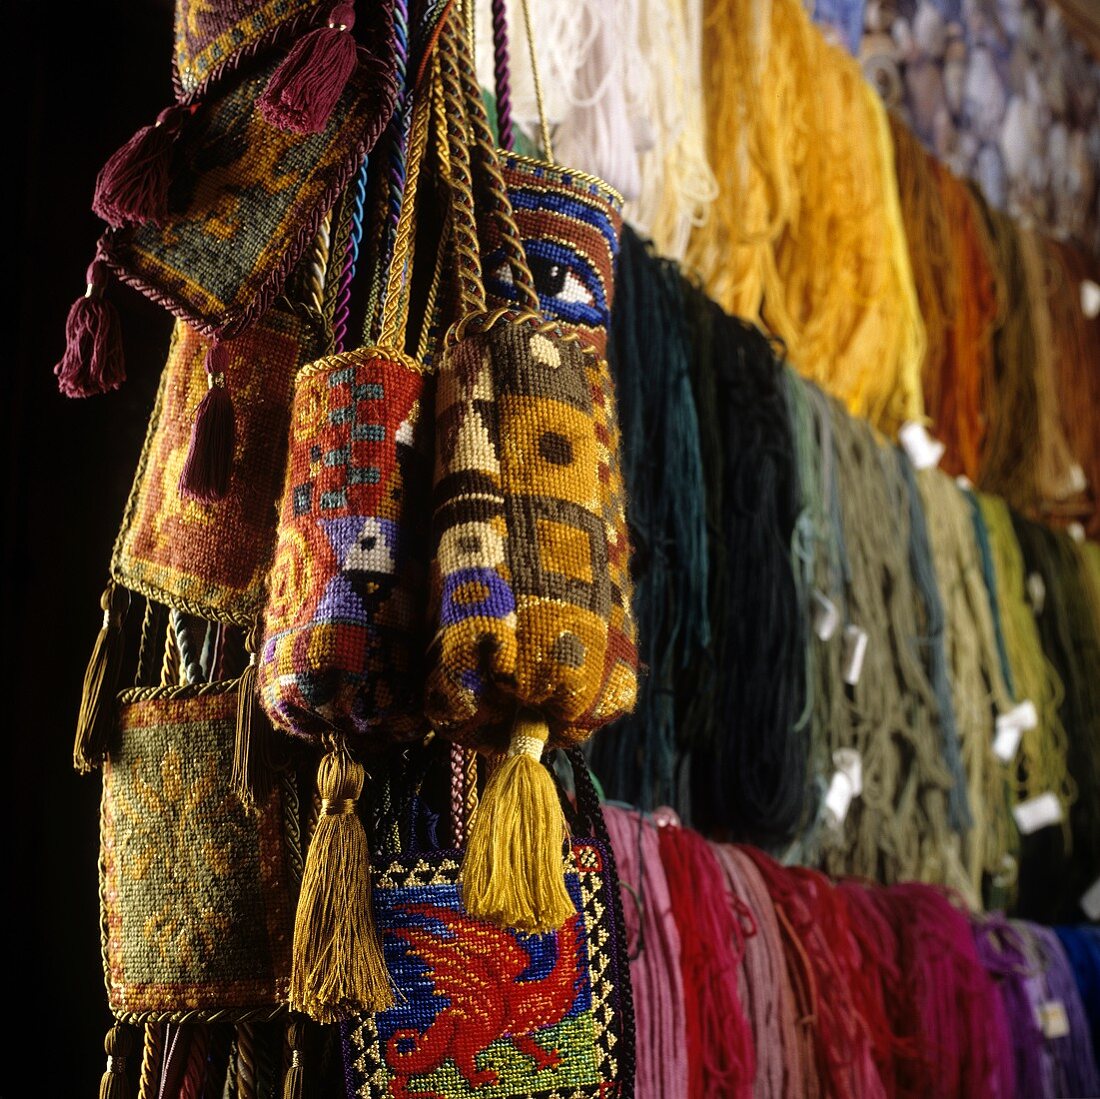 Coloured strands of wool and oriental shoulder bags hanging up